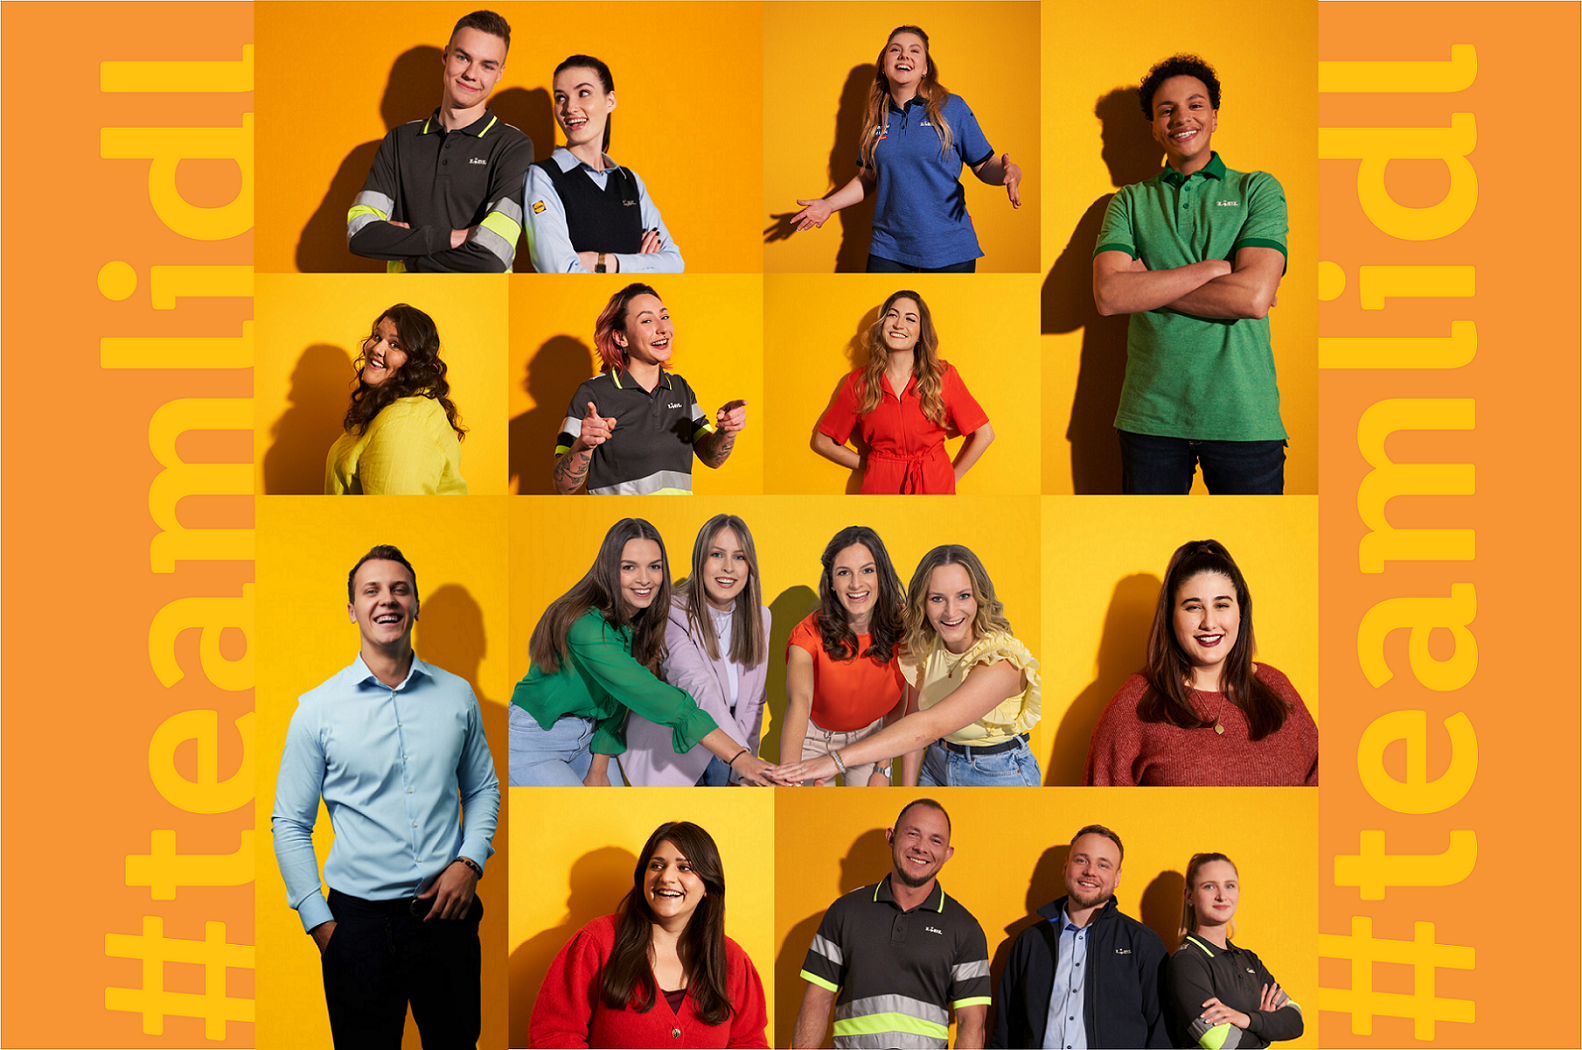 Various pictures of Lidl employees in yellow